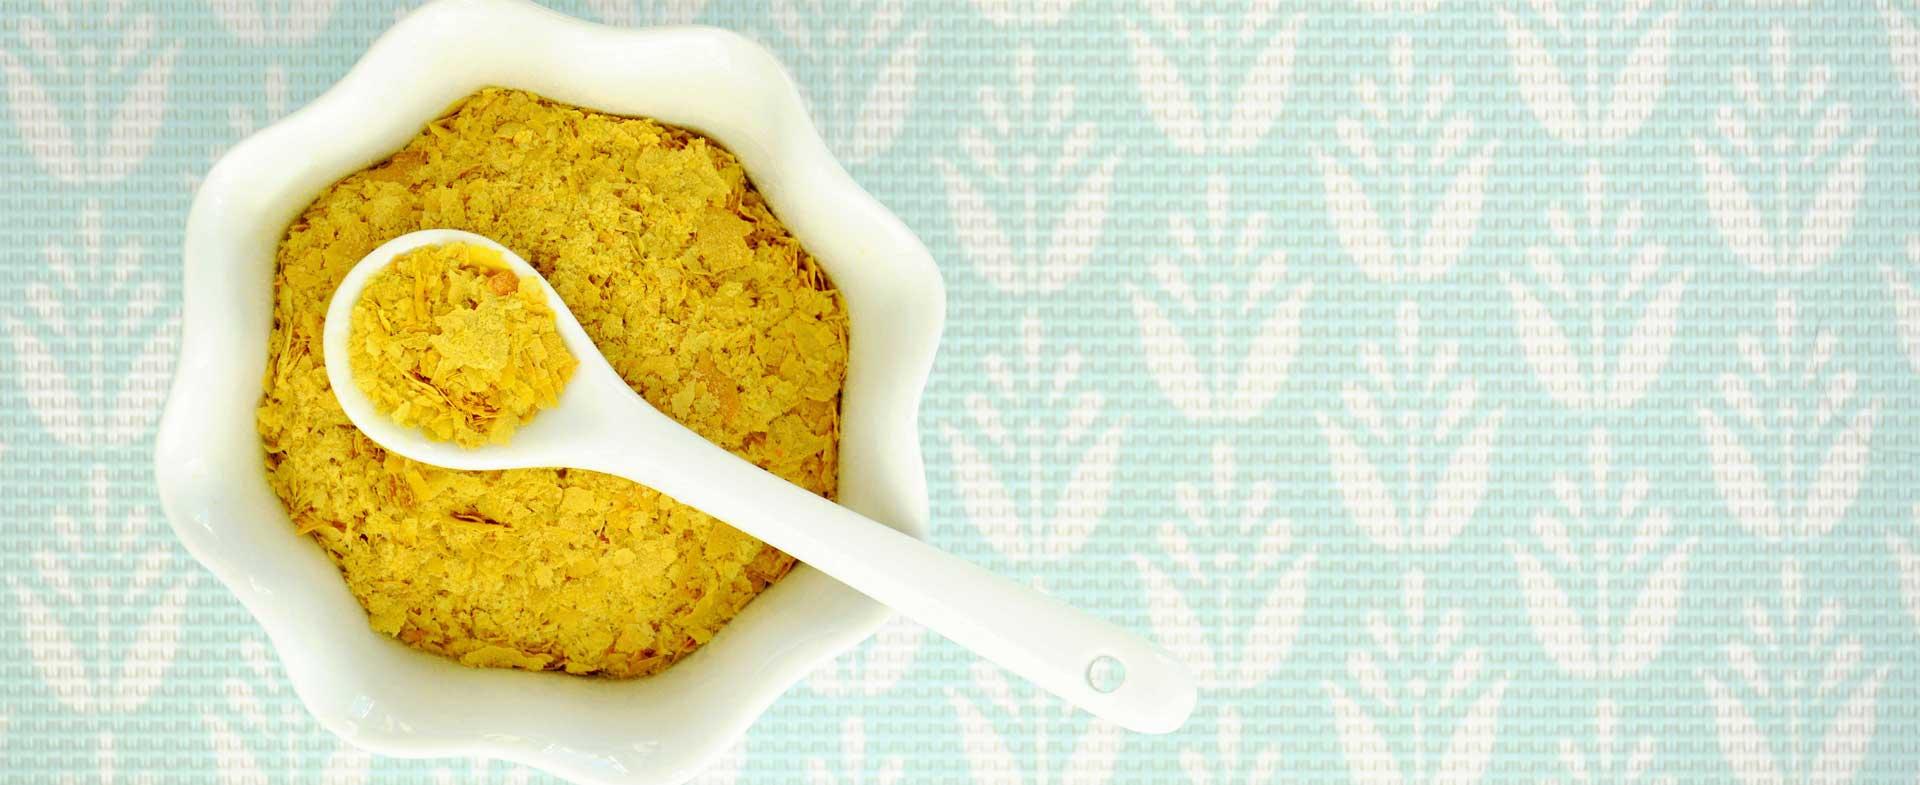 A white bowl filled with nutritional yeast flakes and a white spoon.